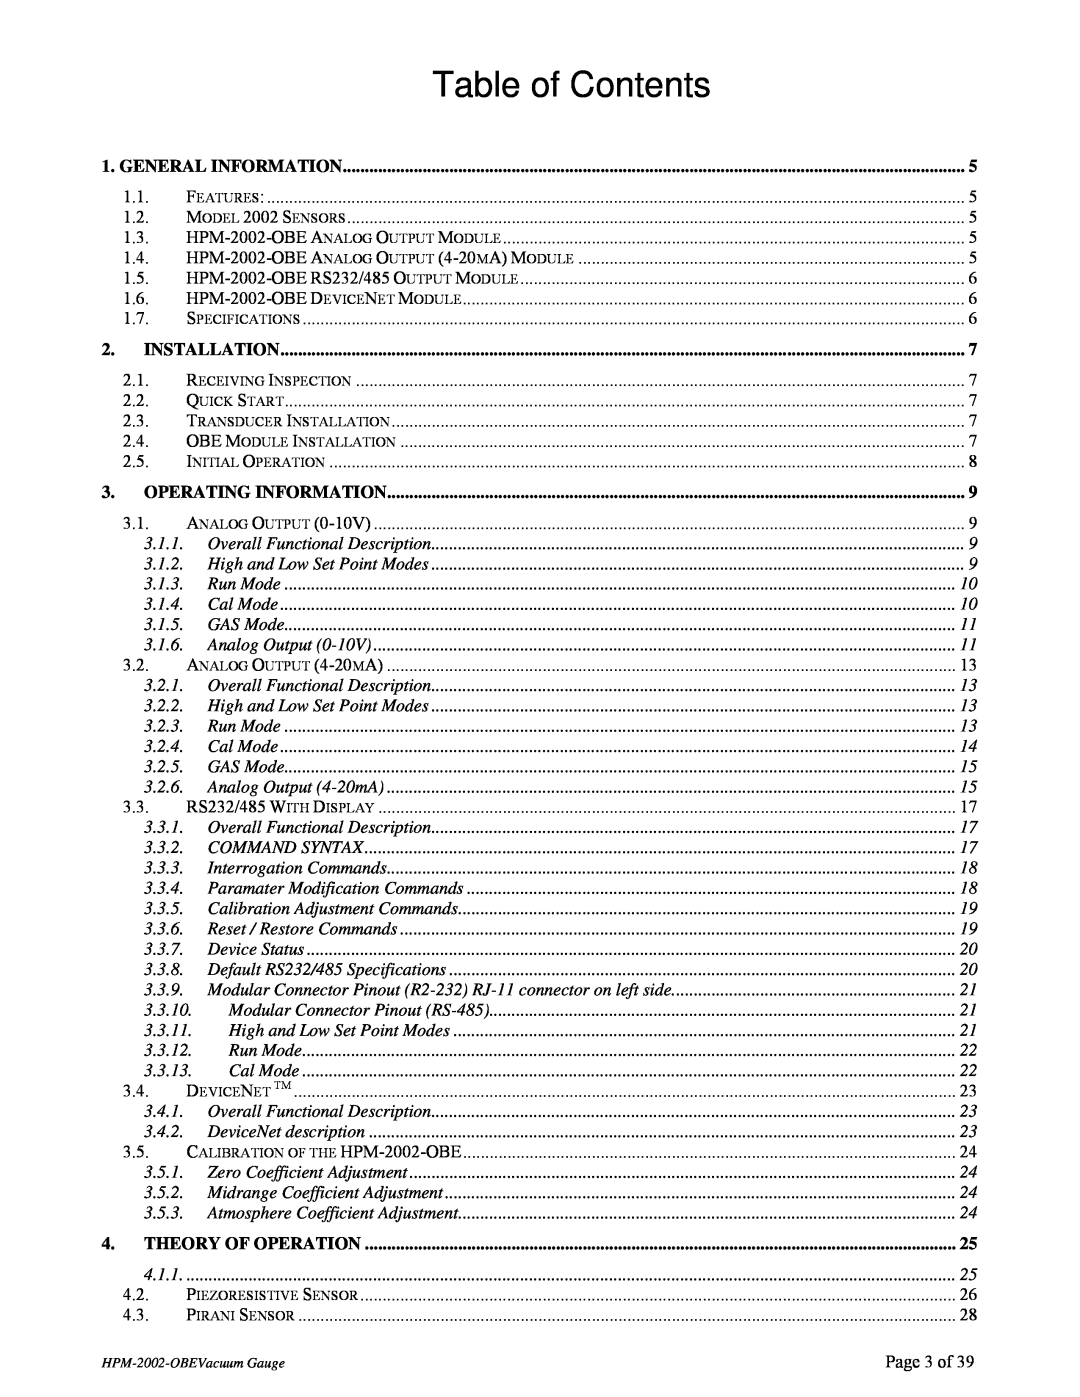 Teledyne HPM-2002-OBE General Information, Installation, Operating Information, Theory Of Operation, Table of Contents 